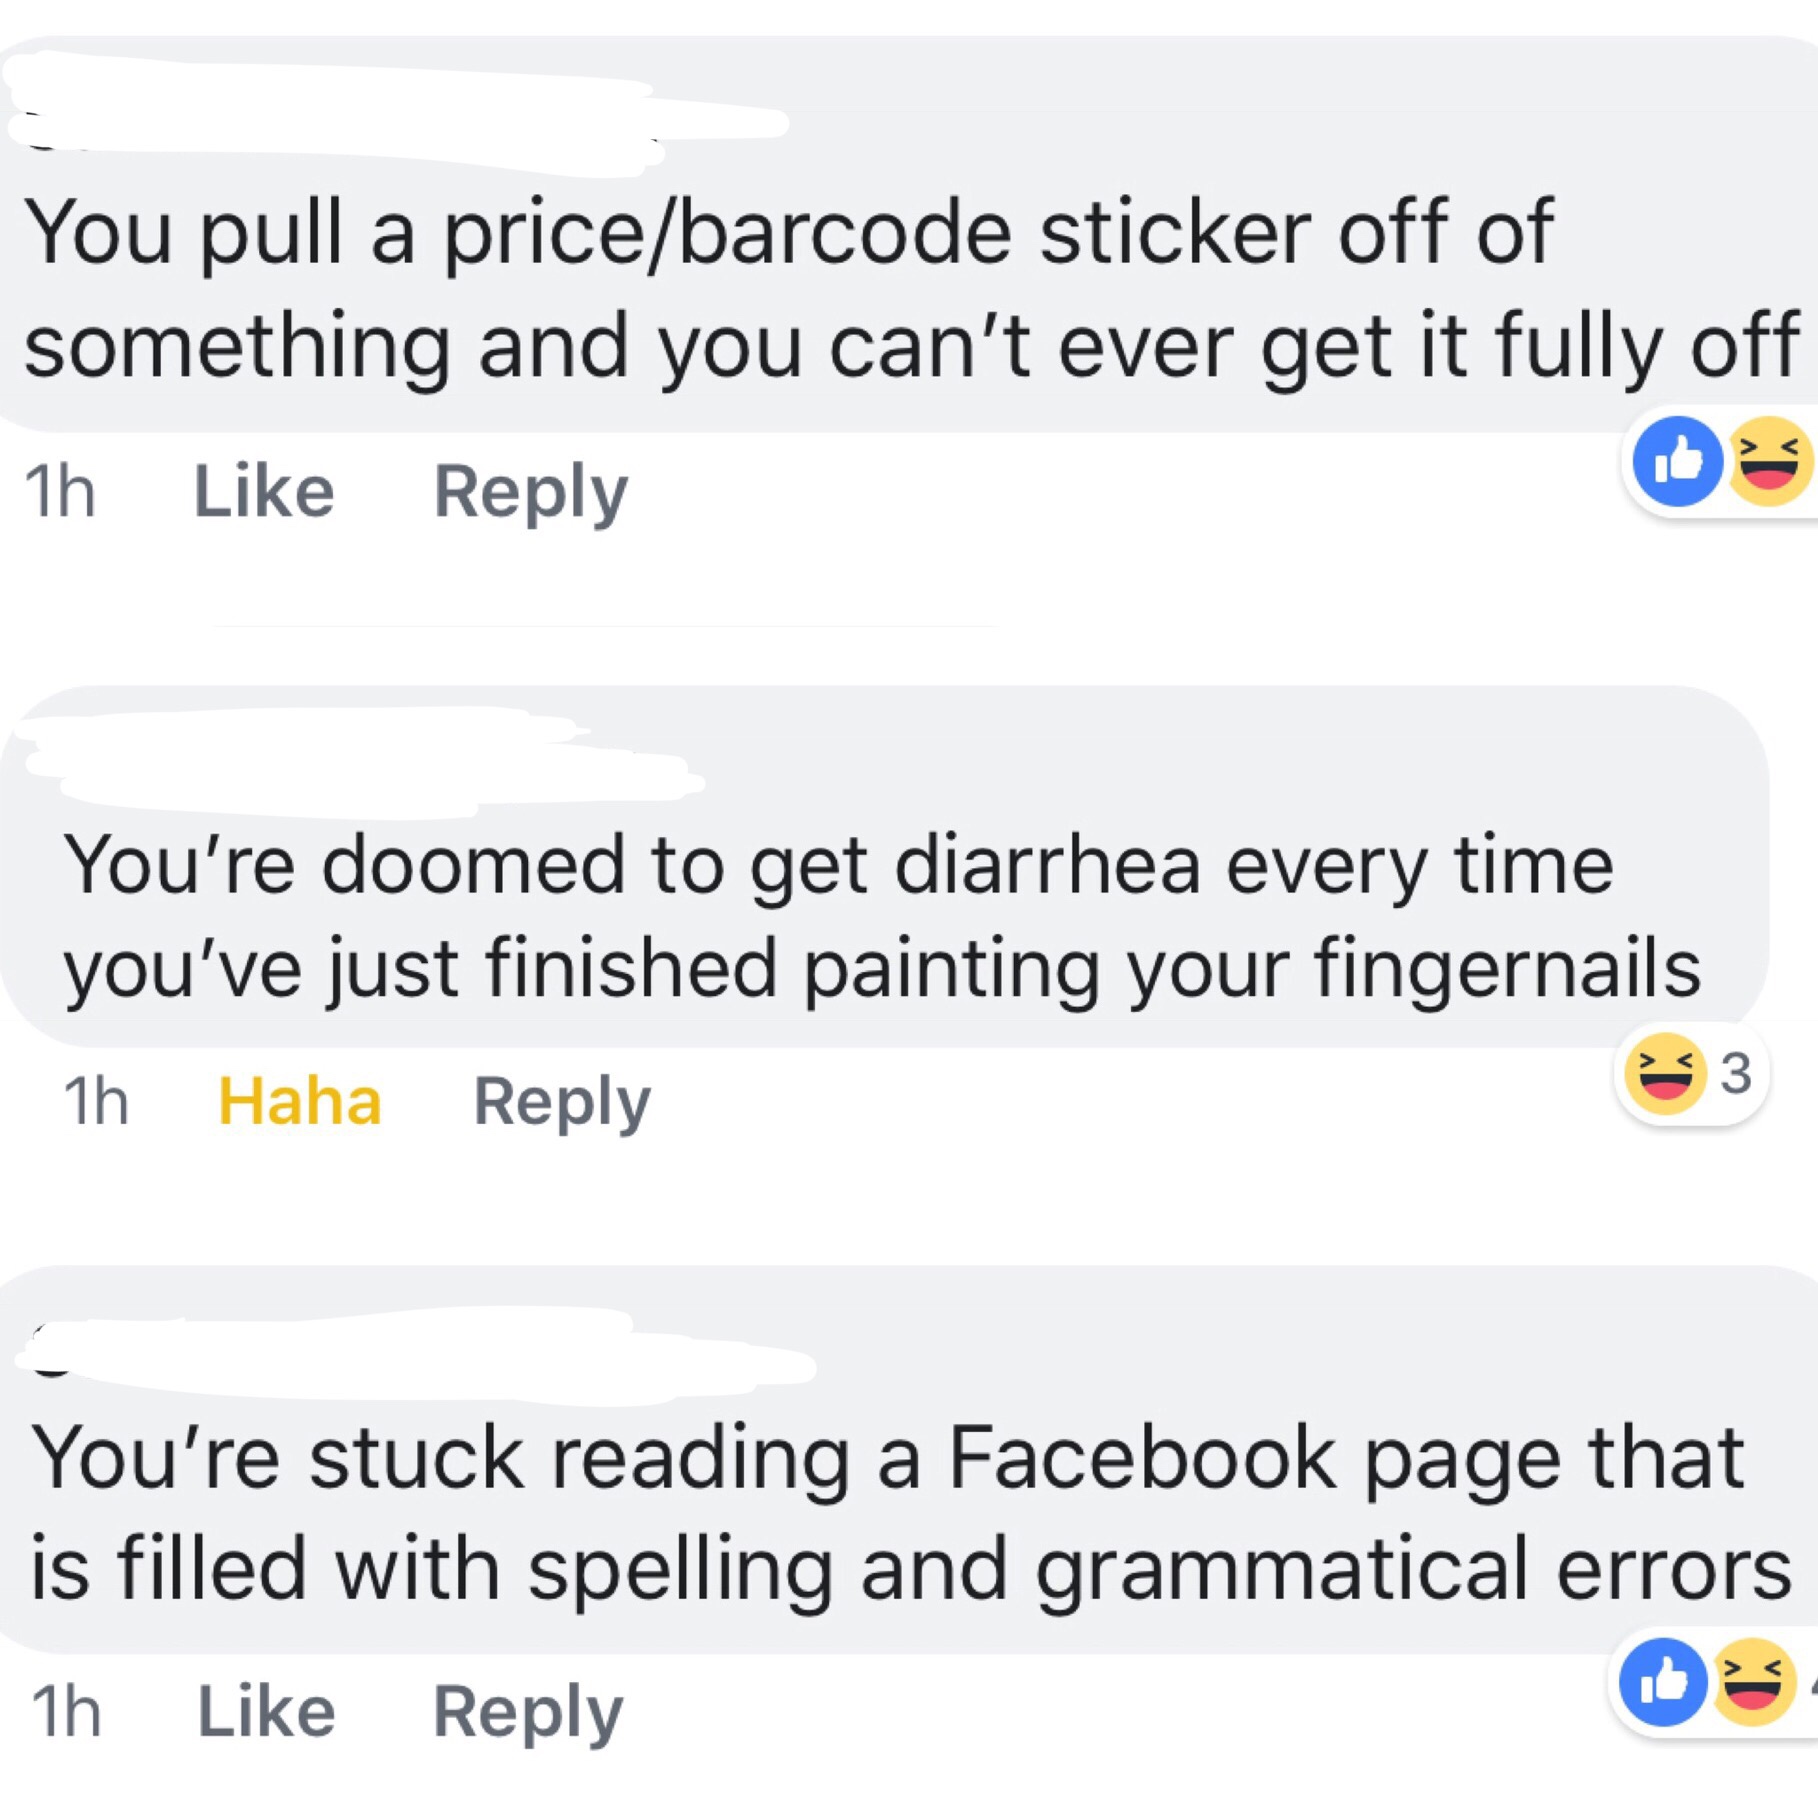 document - You pull a pricebarcode sticker off of something and you can't ever get it fully off 1h You're doomed to get diarrhea every time you've just finished painting your fingernails 1h Haha 3 You're stuck reading a Facebook page that is filled with s